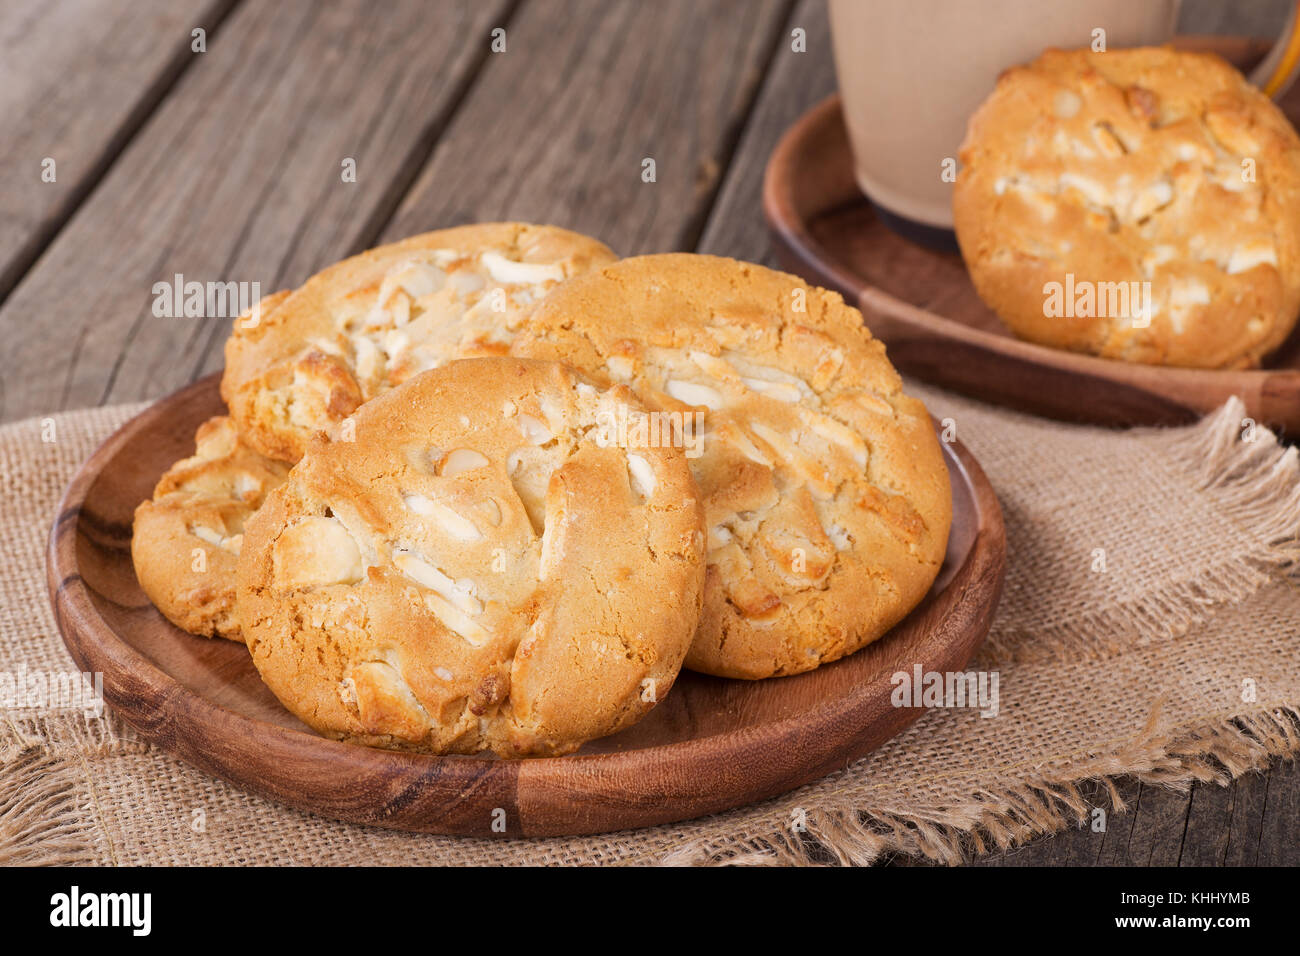 Closeup of white chocolate macadamia nut cookies on a wooden plate Stock Photo